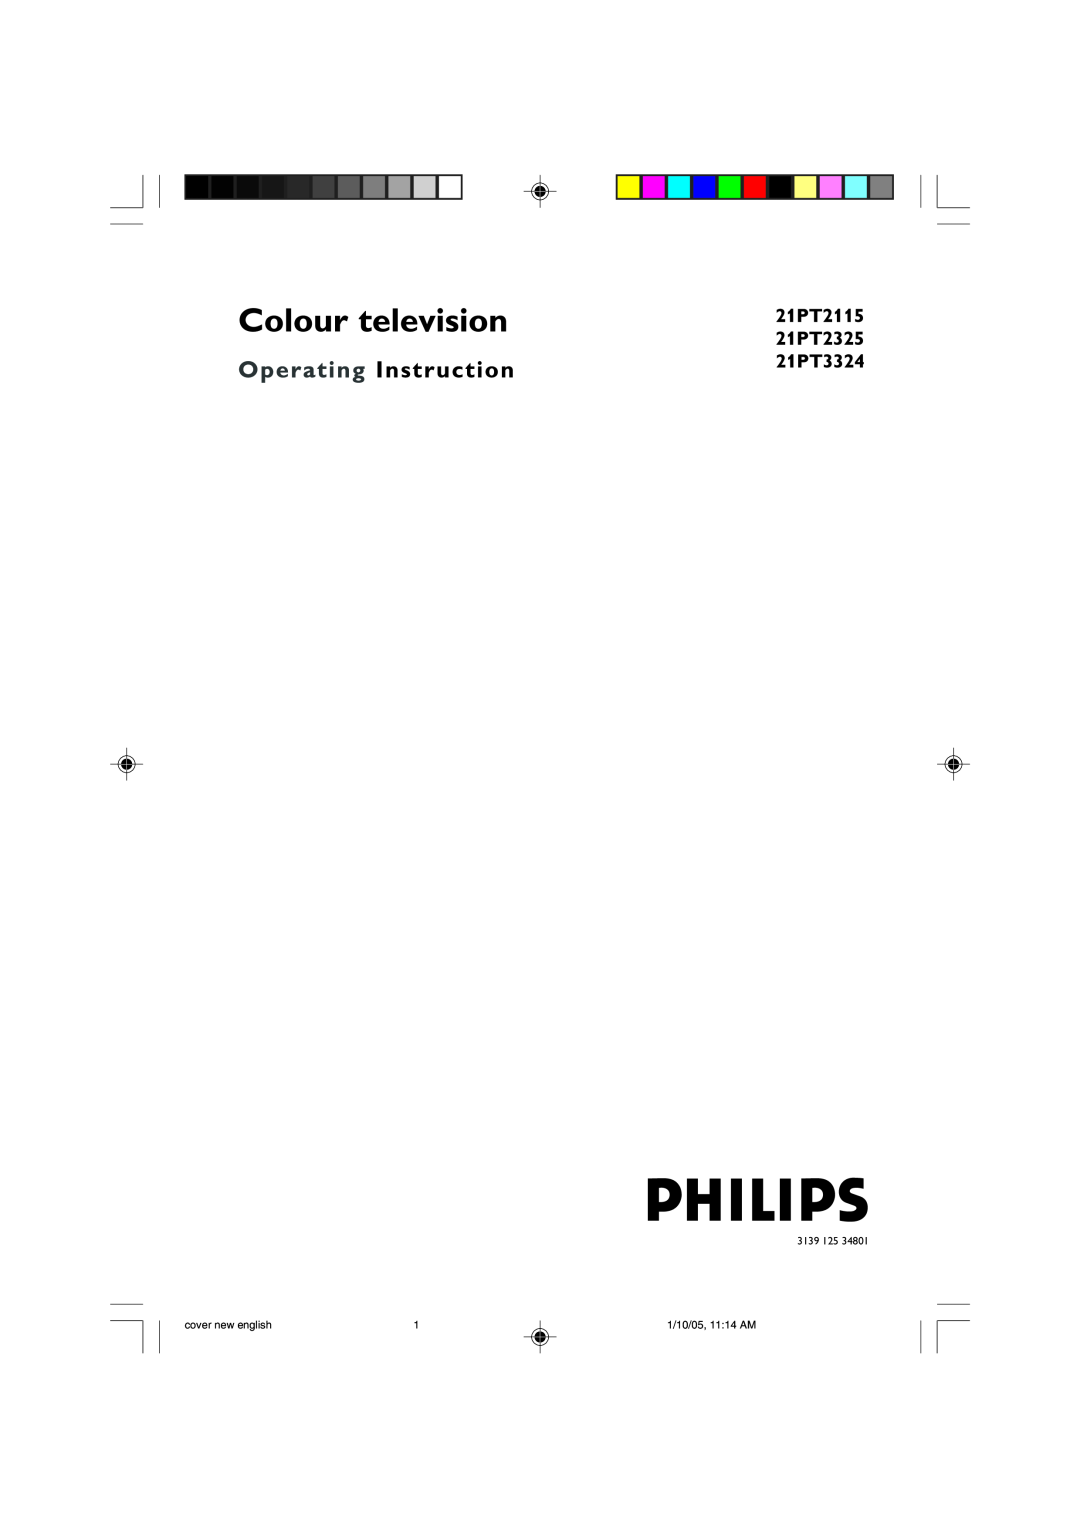 Philips 21PT2115, 21PT2325, 21PT3324 manual cover new english, 1/10/05, 1114 AM 